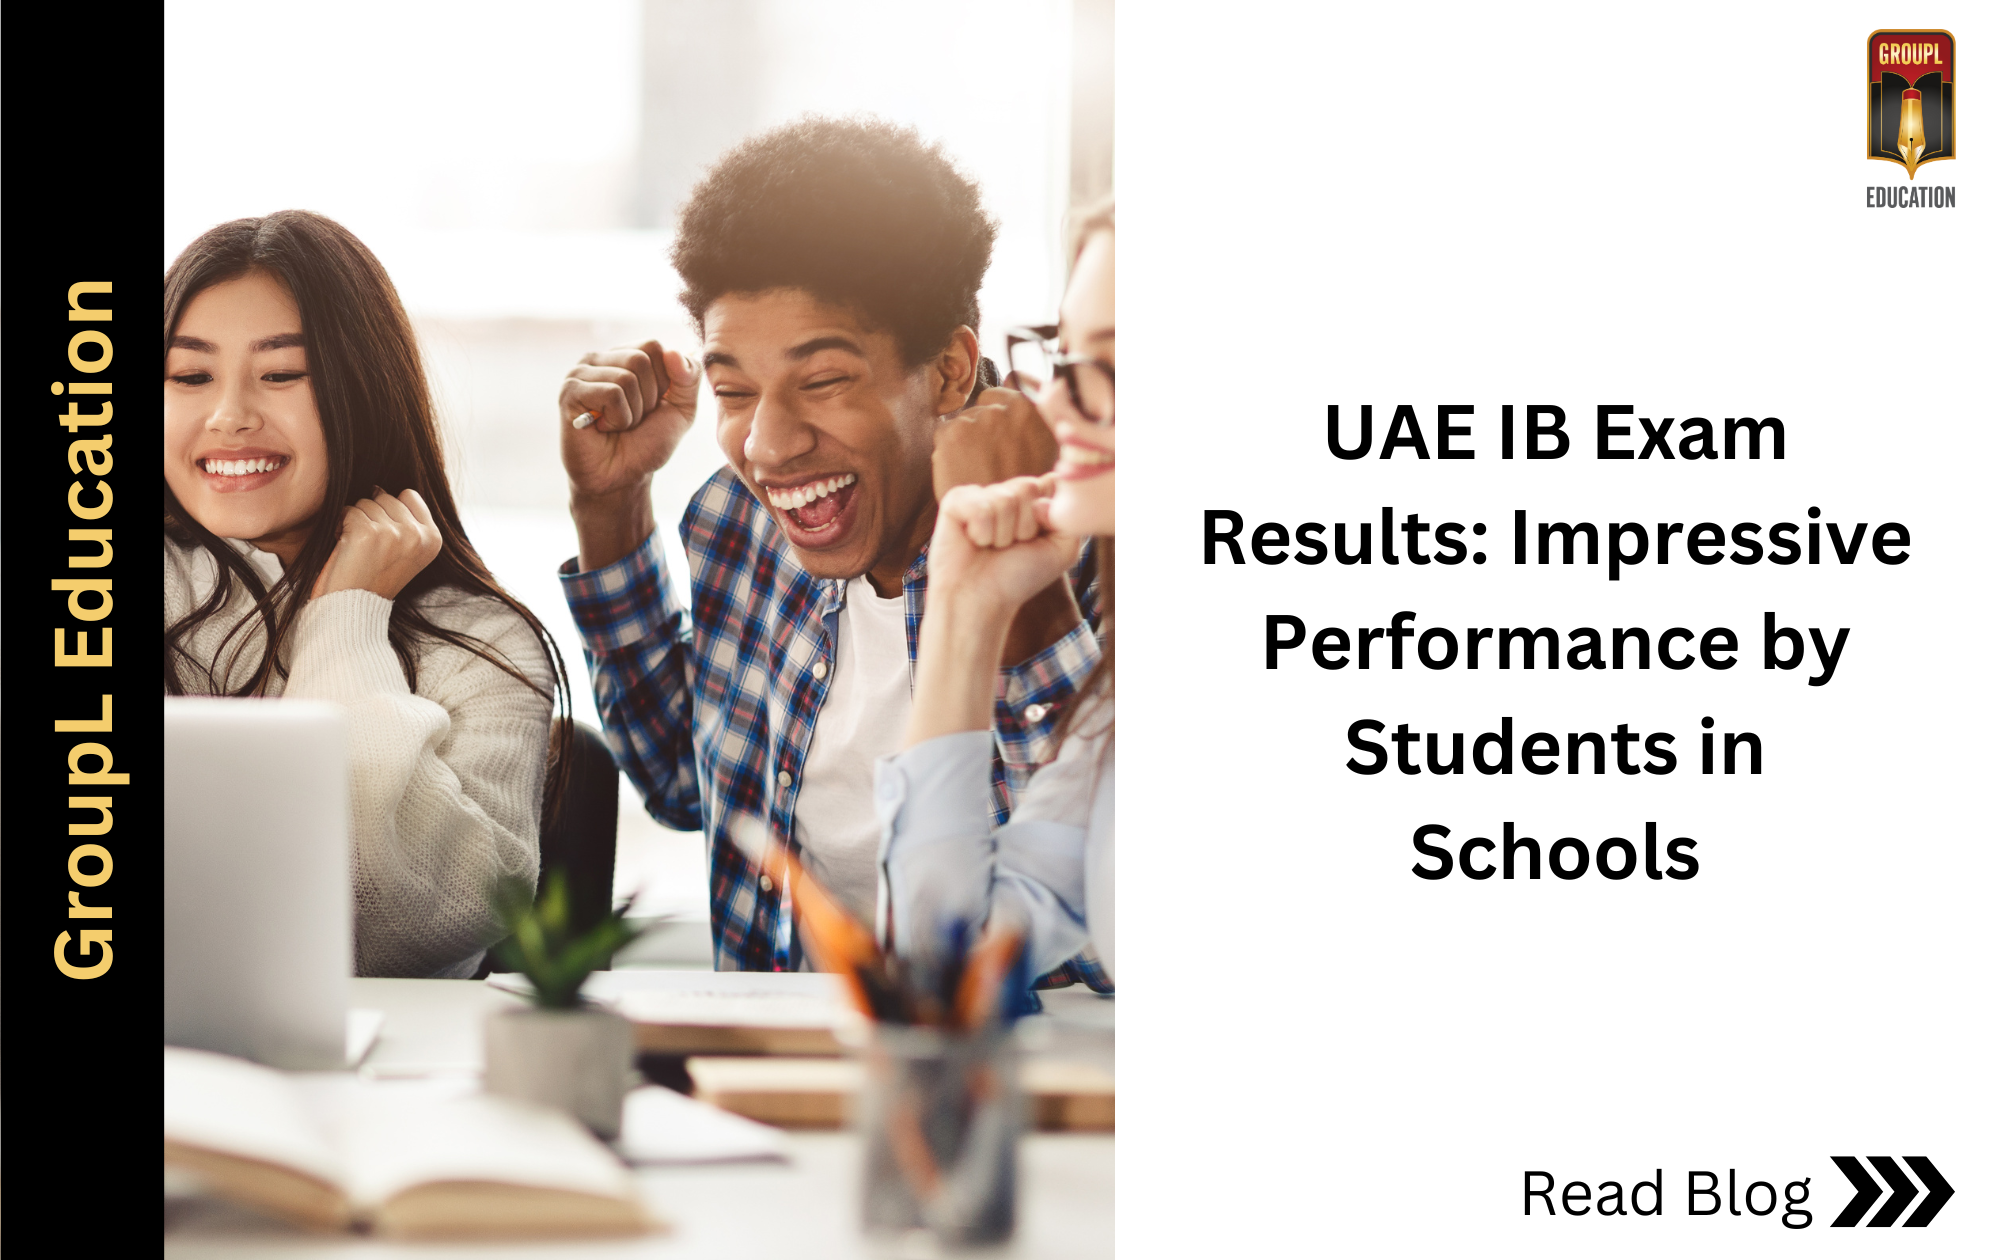 UAE IB Exam Results: Impressive Performance by Students in Schools